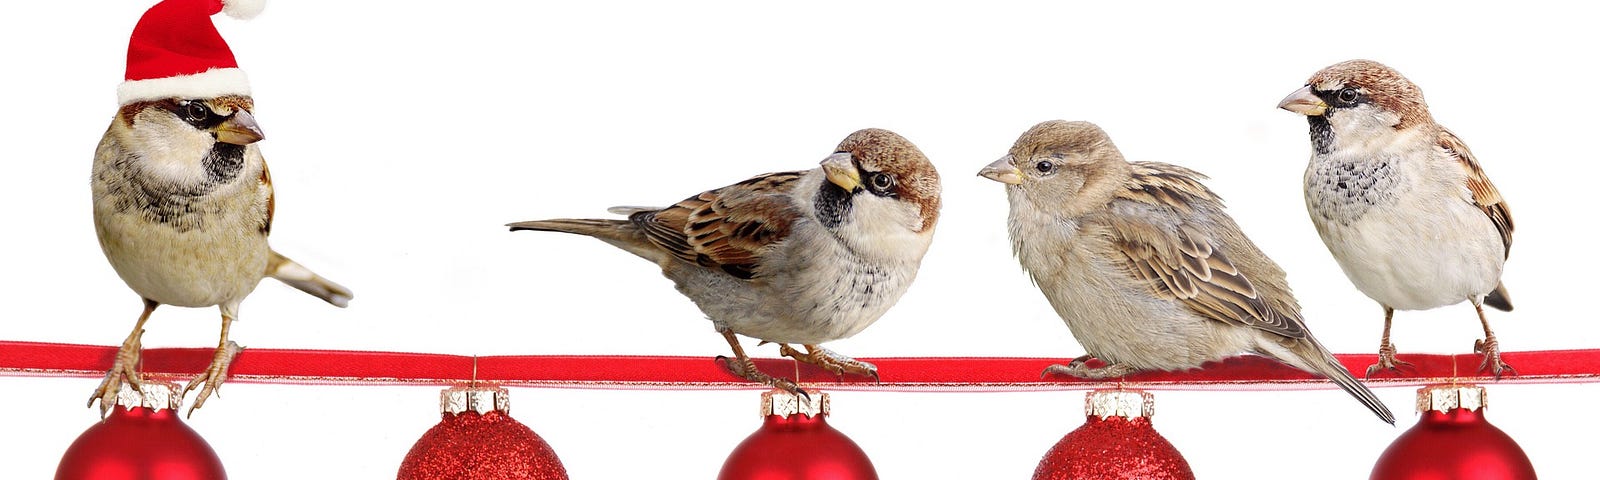 four sparrows on a red ribbon with red Christmas ornaments hanging below. One sparrow has on a Santa hat.